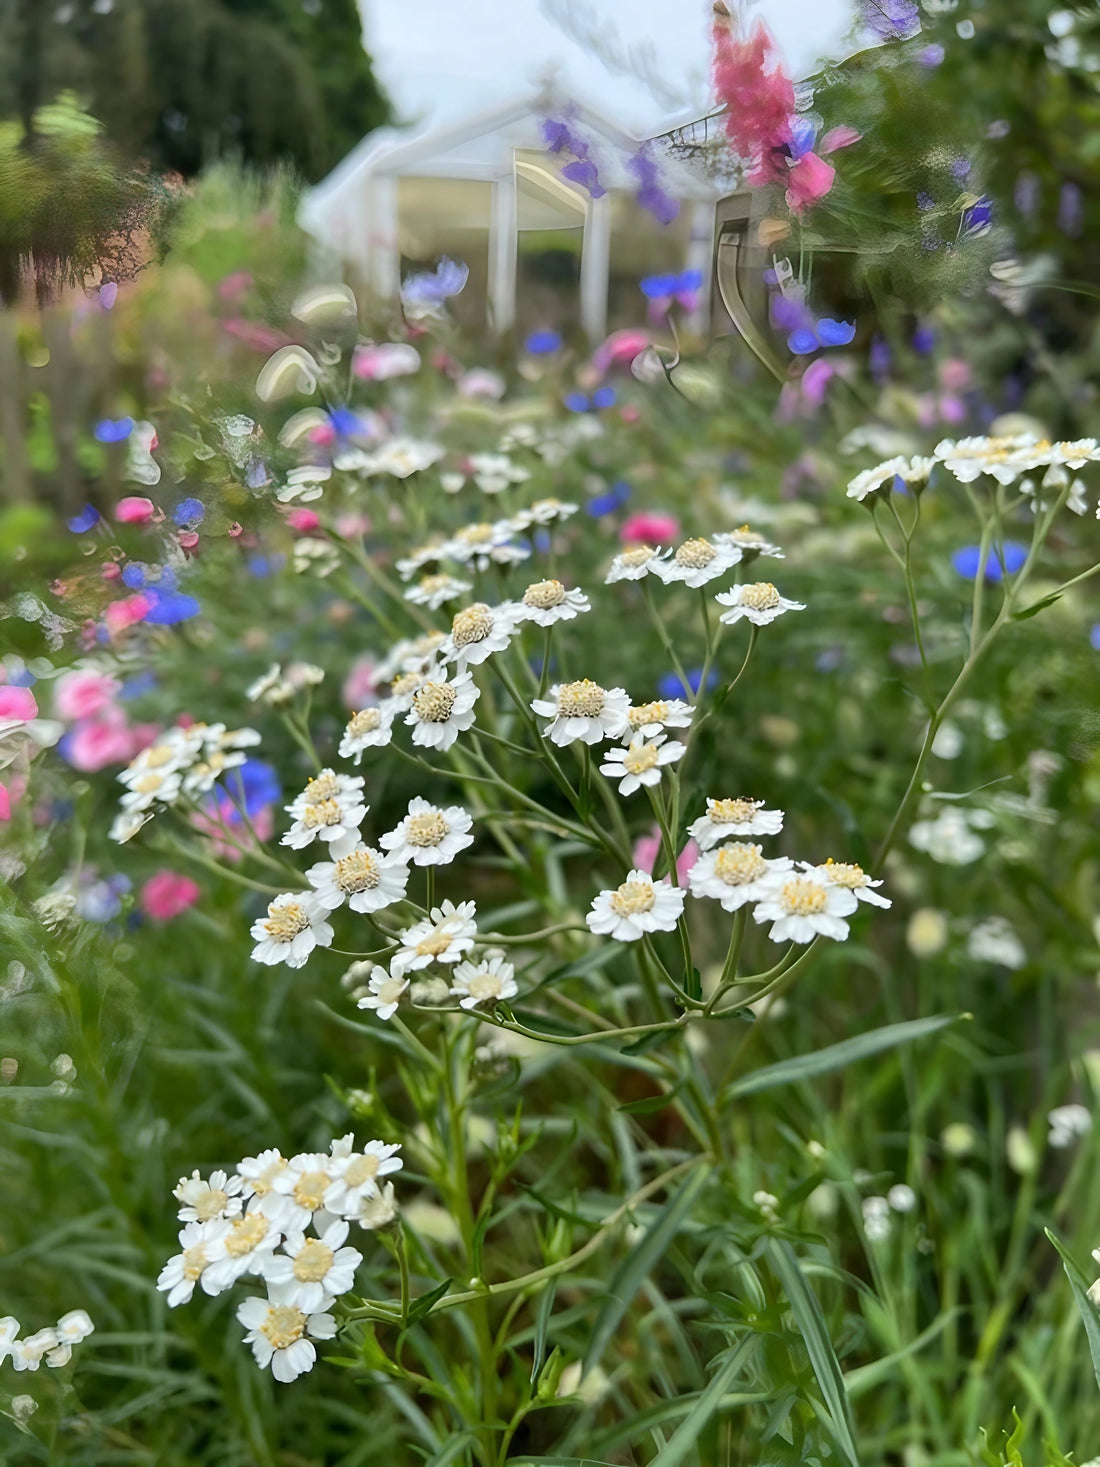 Achillea ptarmica Ballerina amidst a mix of white and blue flowers in a garden landscape